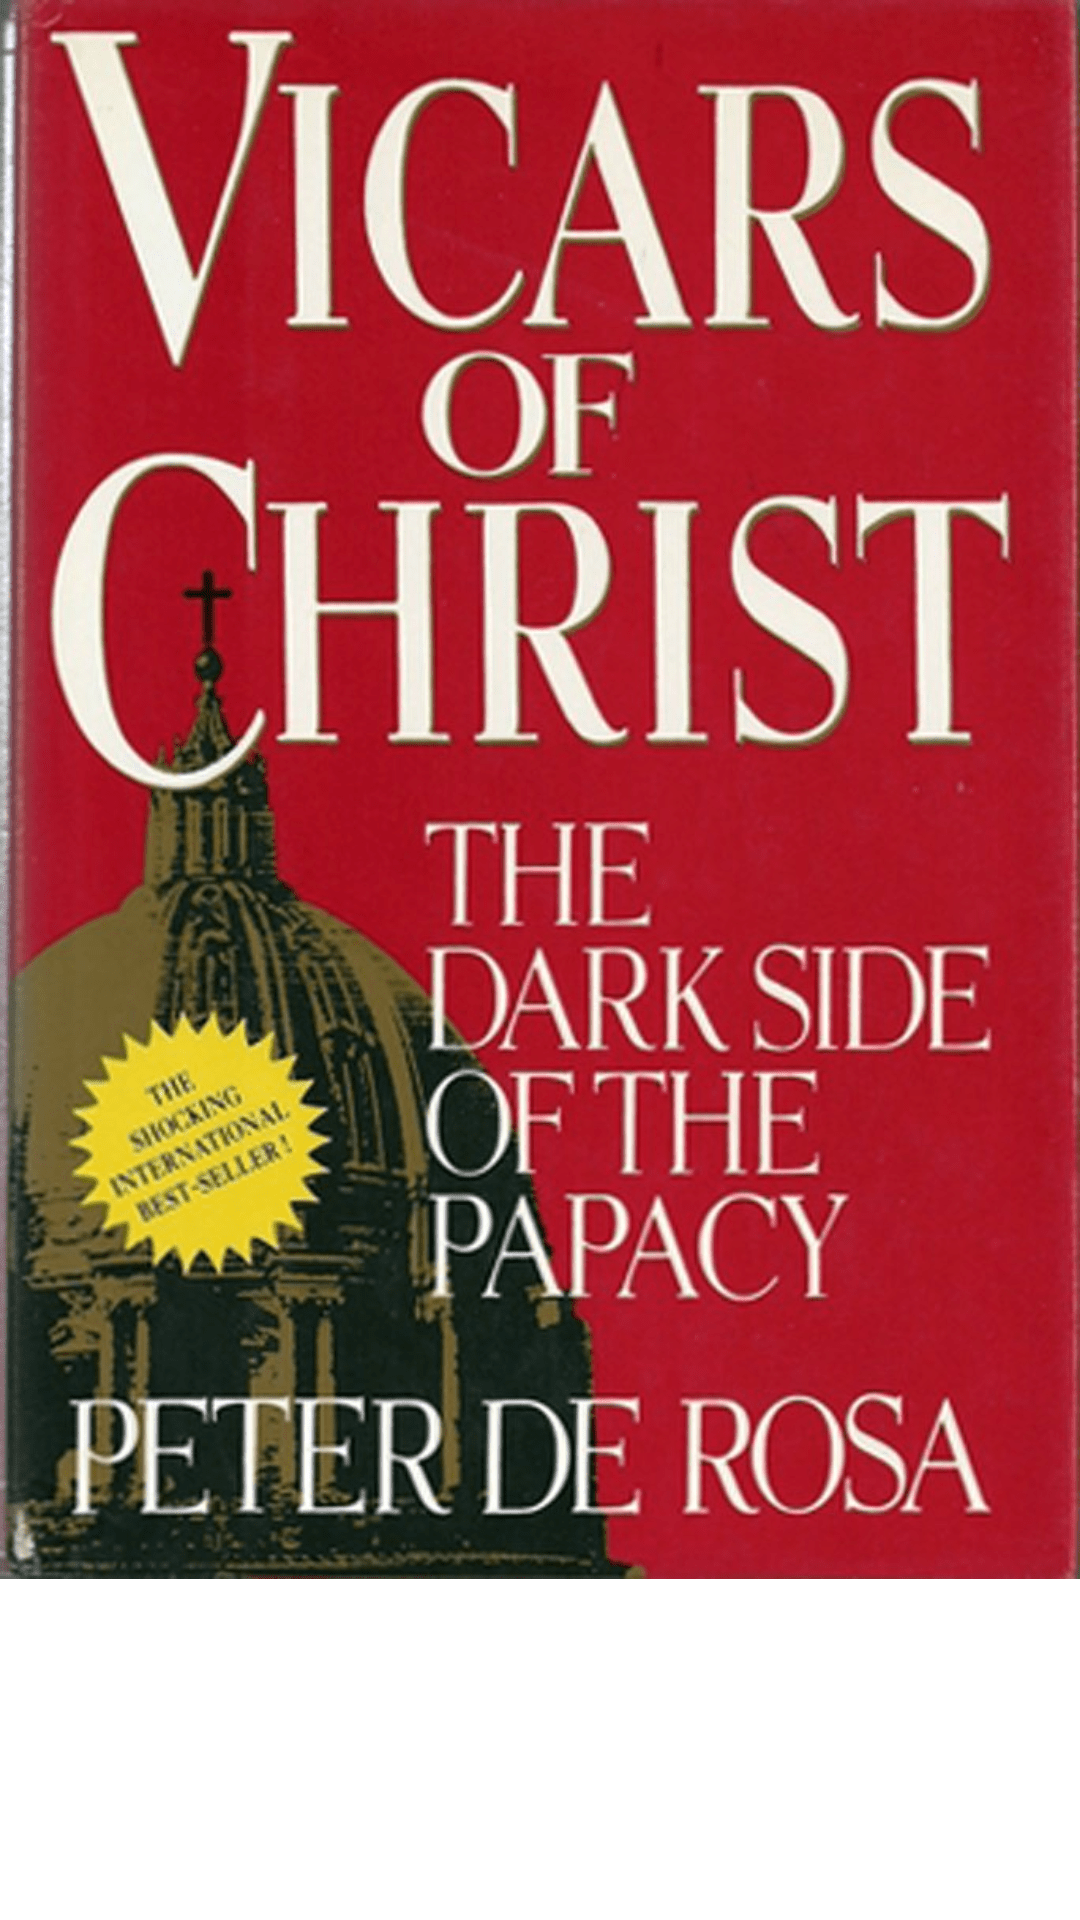 Vicars of Christ : The Dark Side of the Papacy